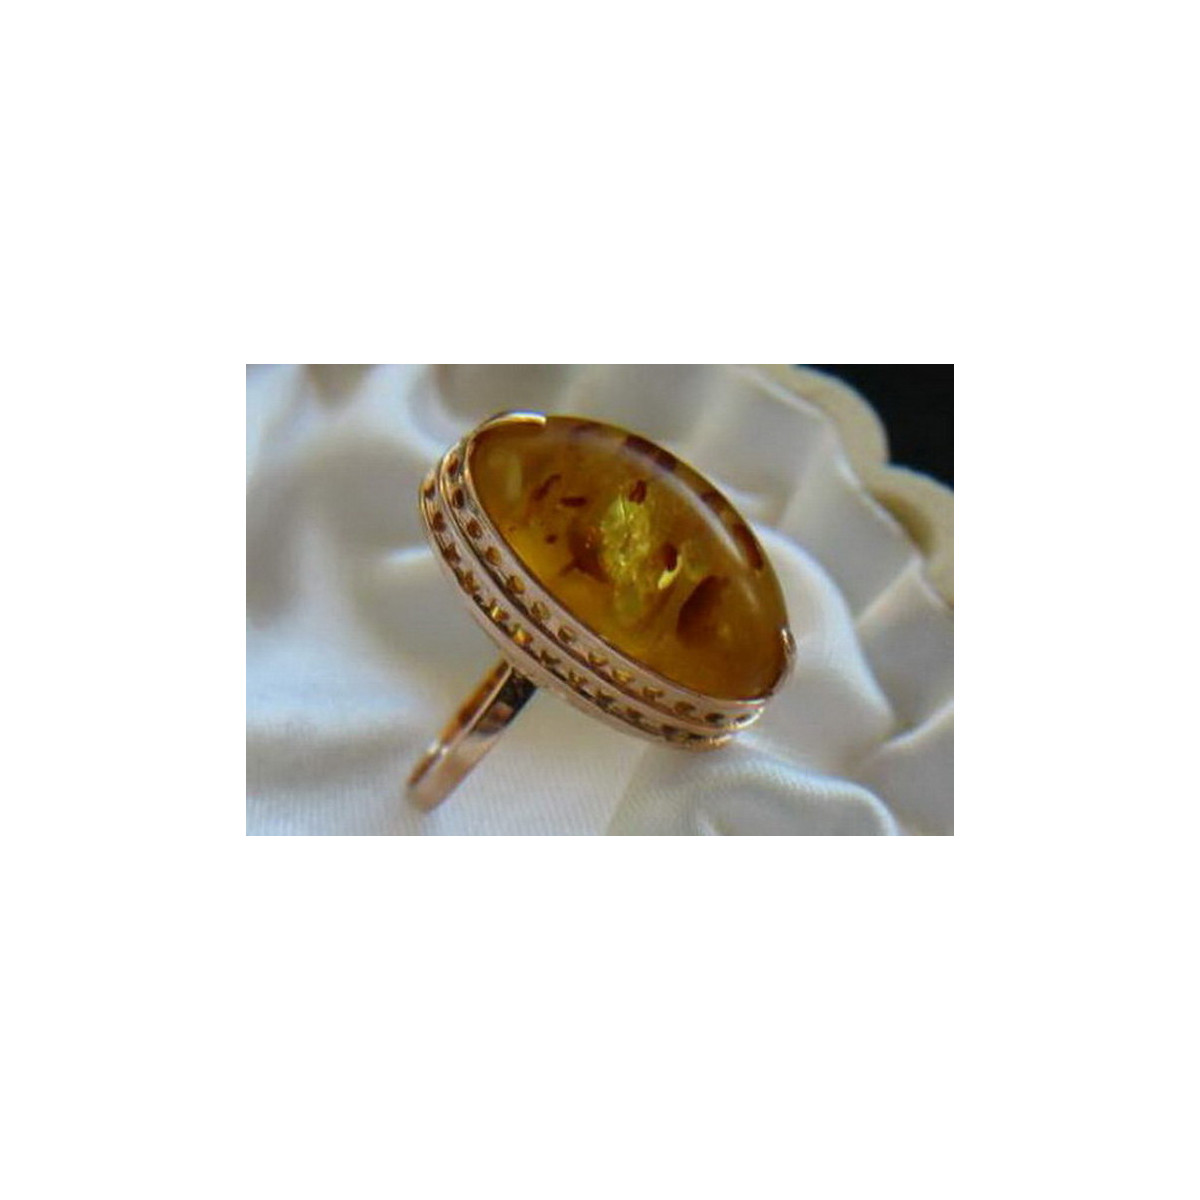 Russian rose Soviet pink USSR red 585 583 gold amber ring vrab014